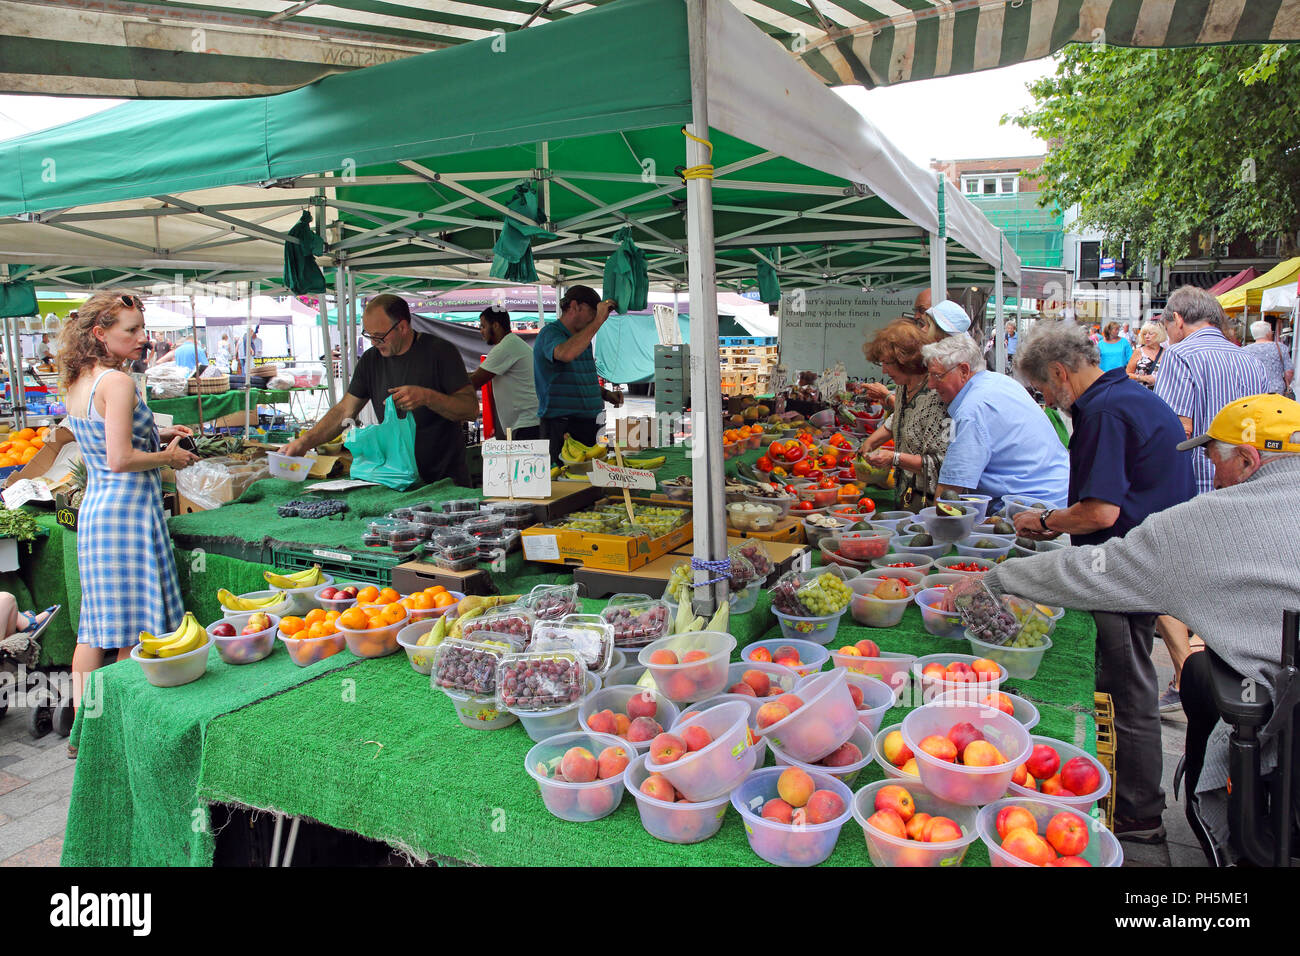 Busy fruit market stall in the city of Salisbury, Wiltshire, England, UK. Stock Photo